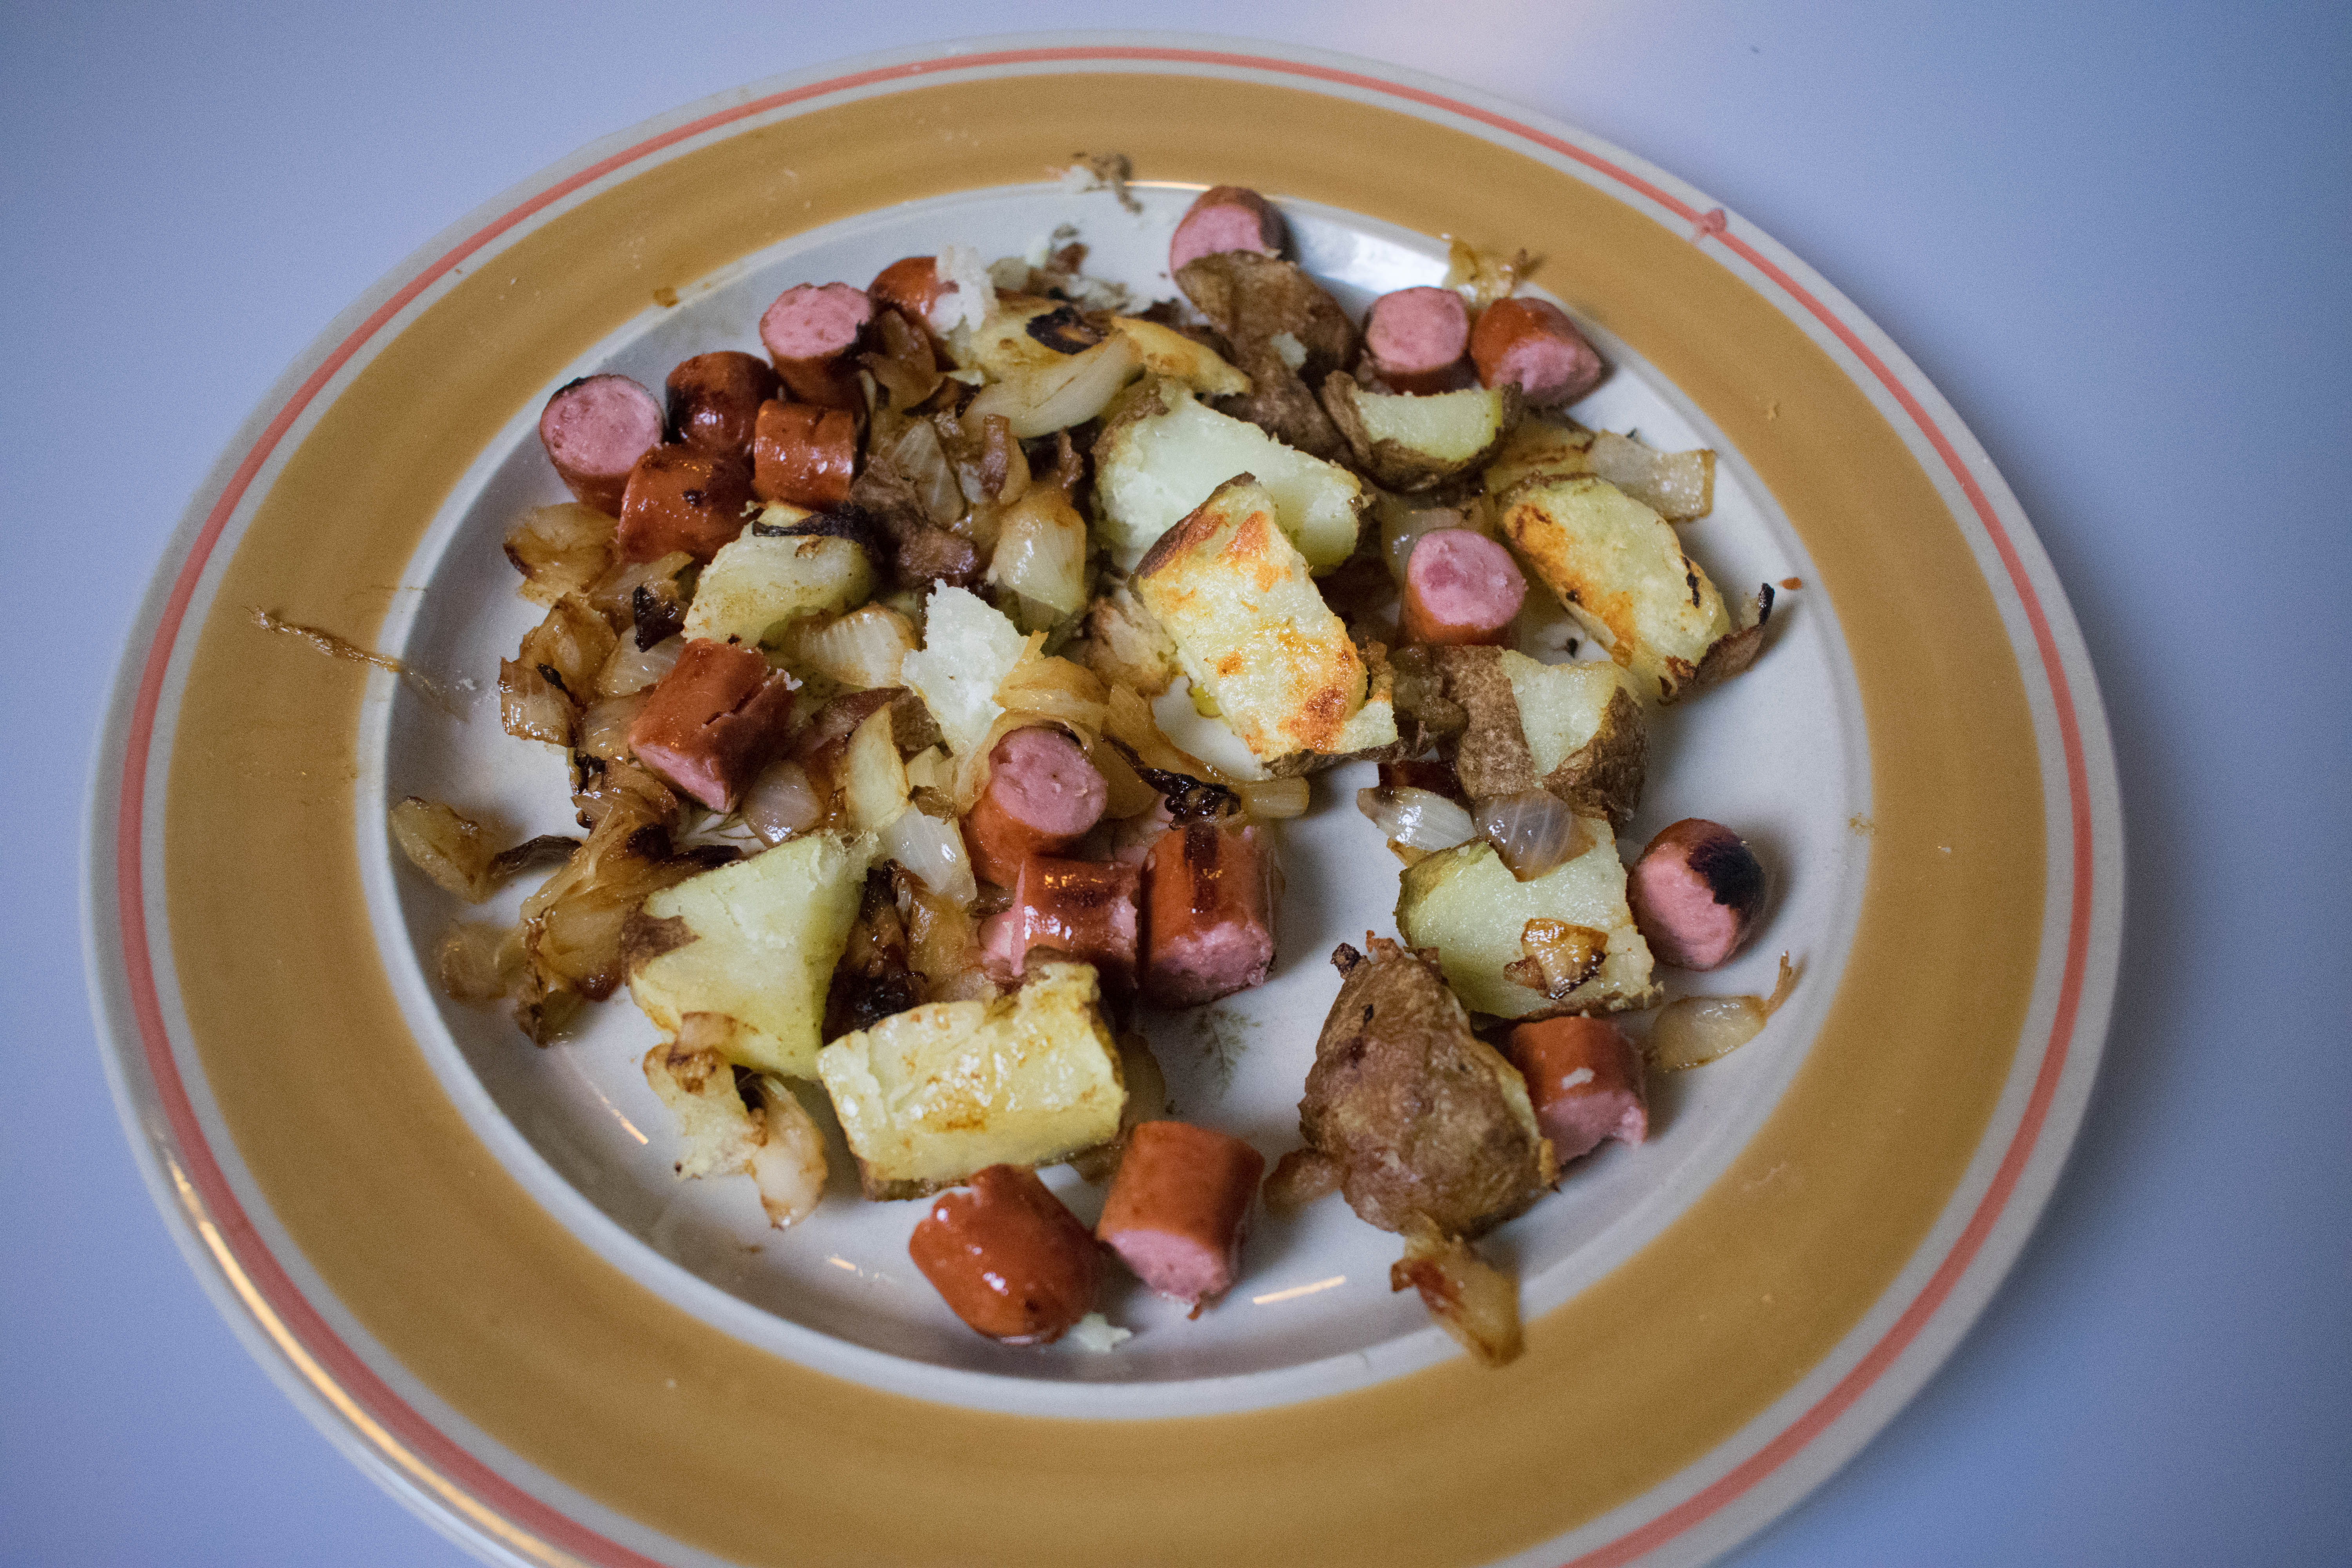 Sausage potato onion skillet breakfast 13g protein in about 300 calories!